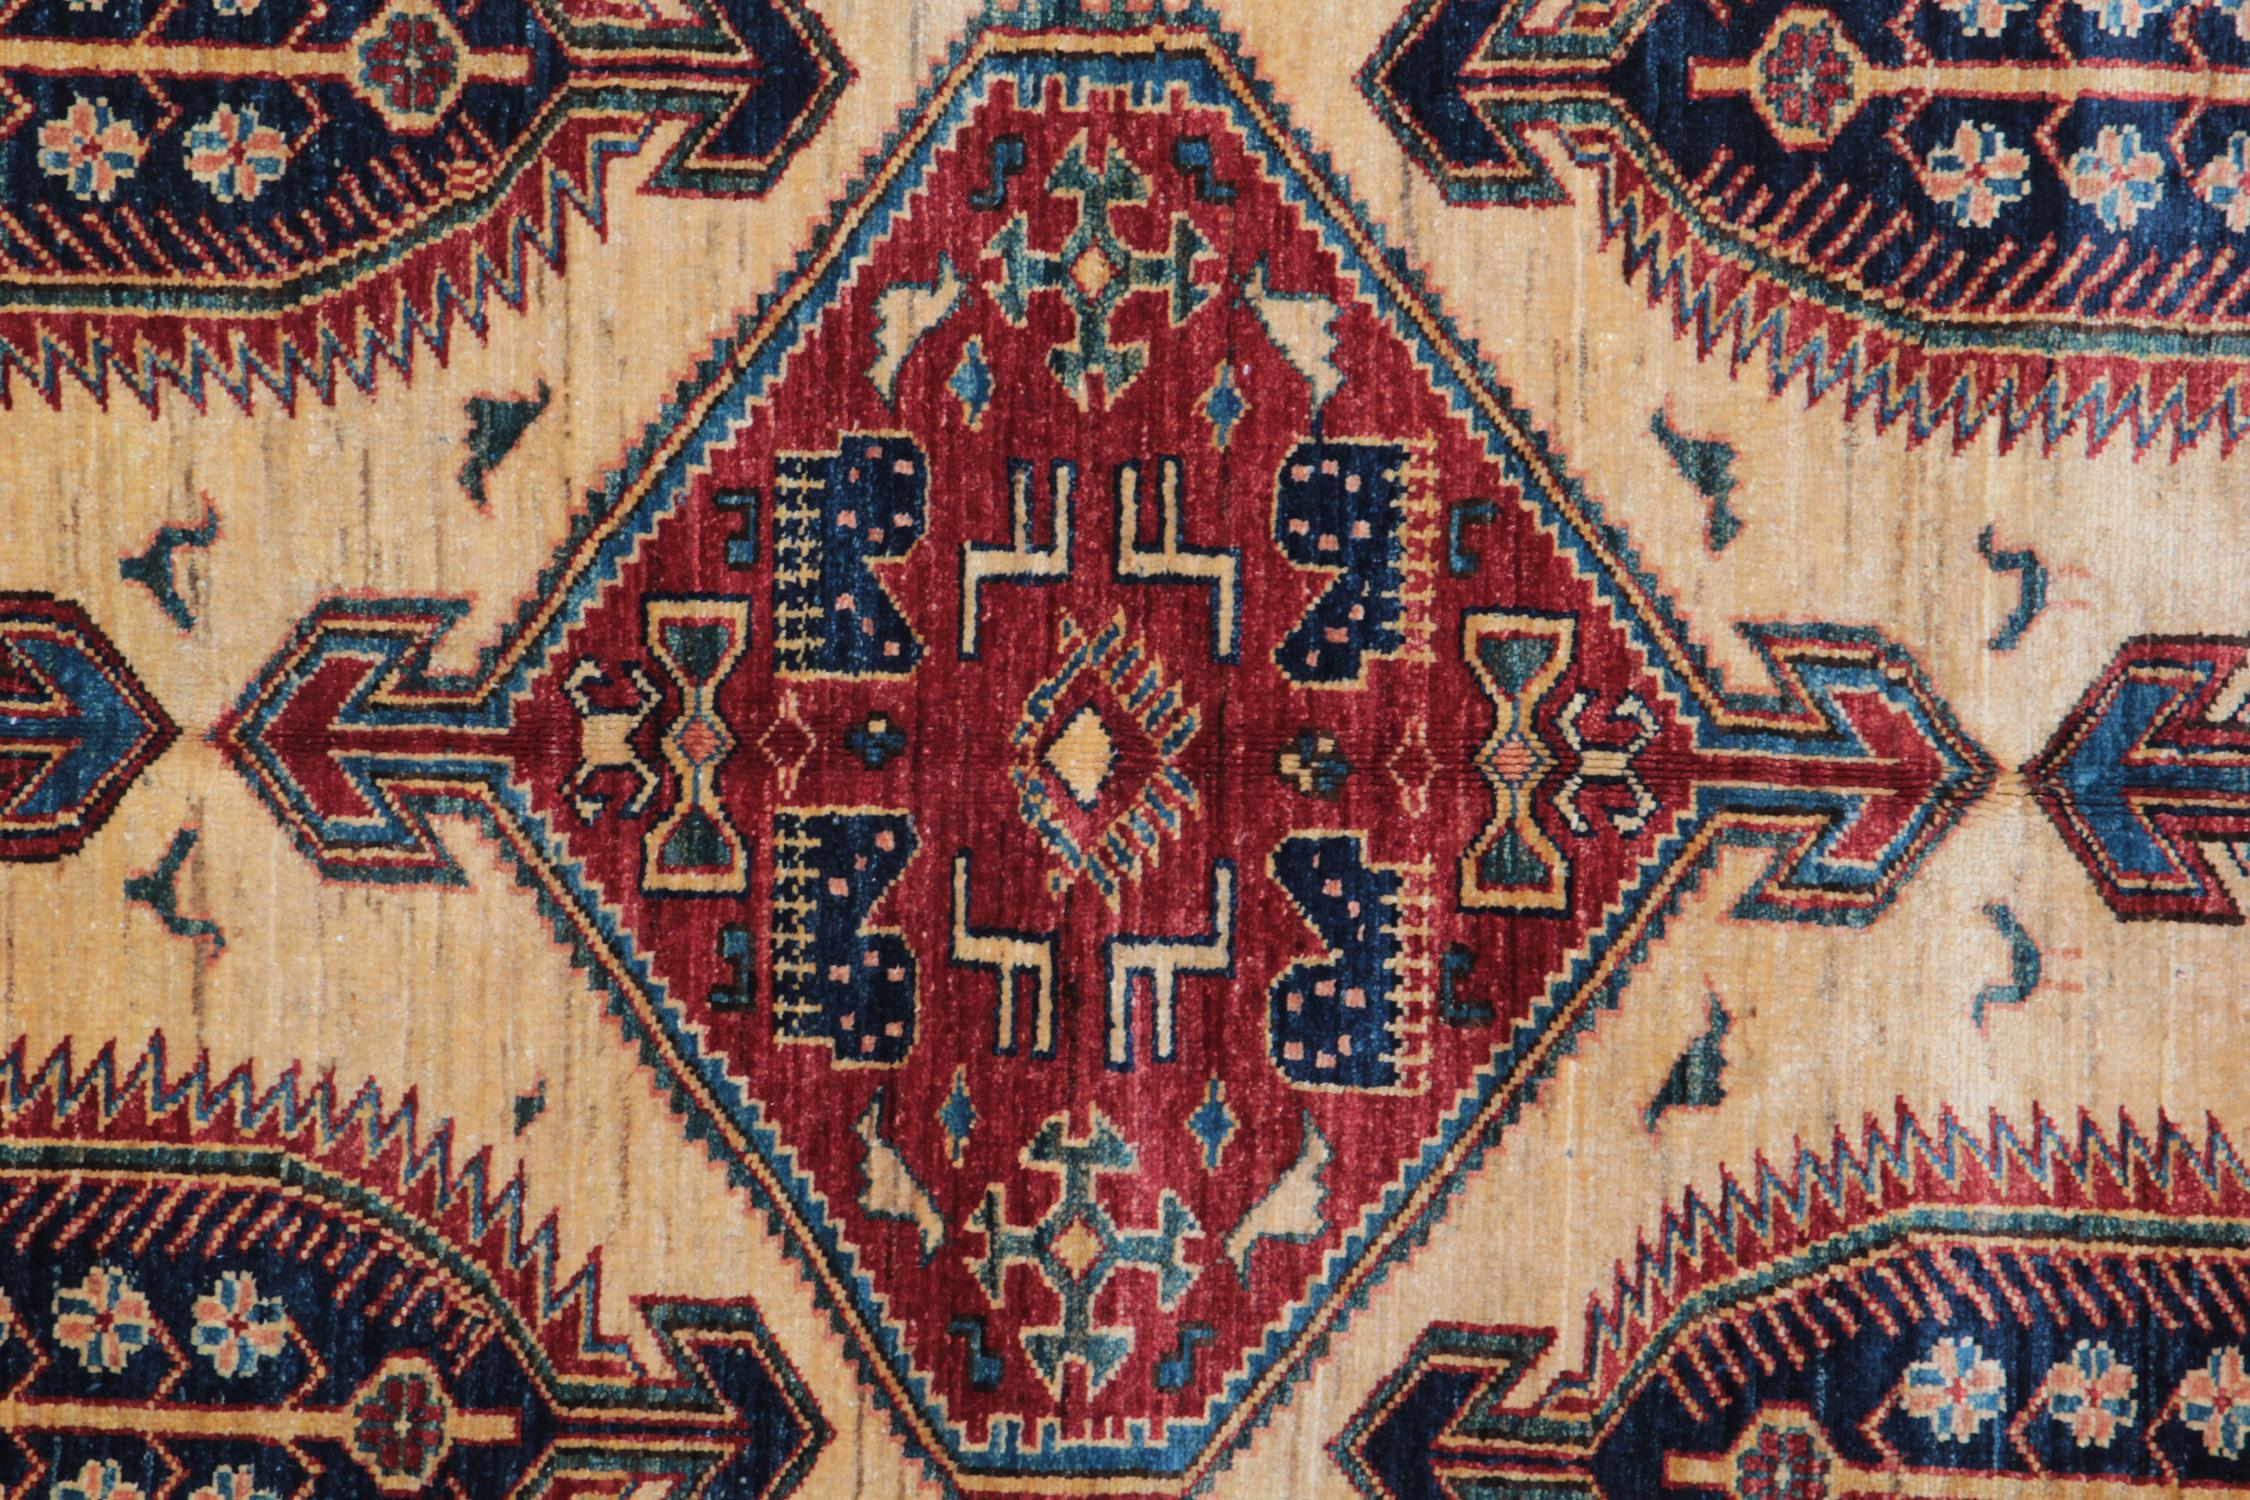 This new traditional handwoven carpet rug is featuring designs from the Kazak region. Traditional rugs are making the region of the northern Persia. This Yellow rug was made by Afghan weavers of top quality wool and cotton. This tribal rug features